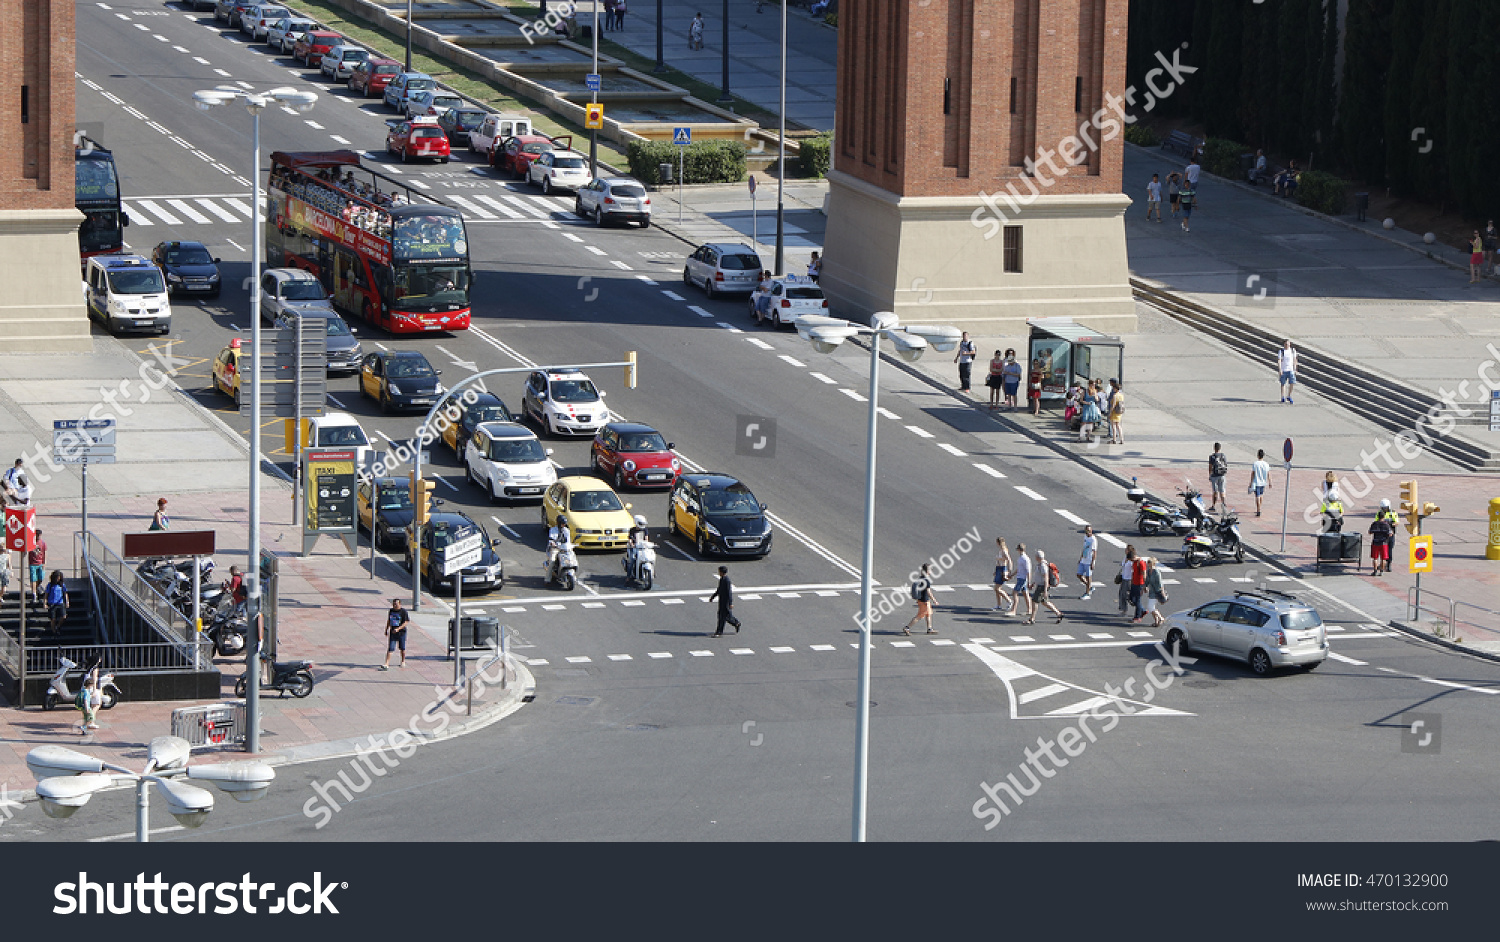 stock-photo-barcelona-traffic-cars-buses-and-pedestrians-on-a-sunny-day-spain-july-470132900.jpg